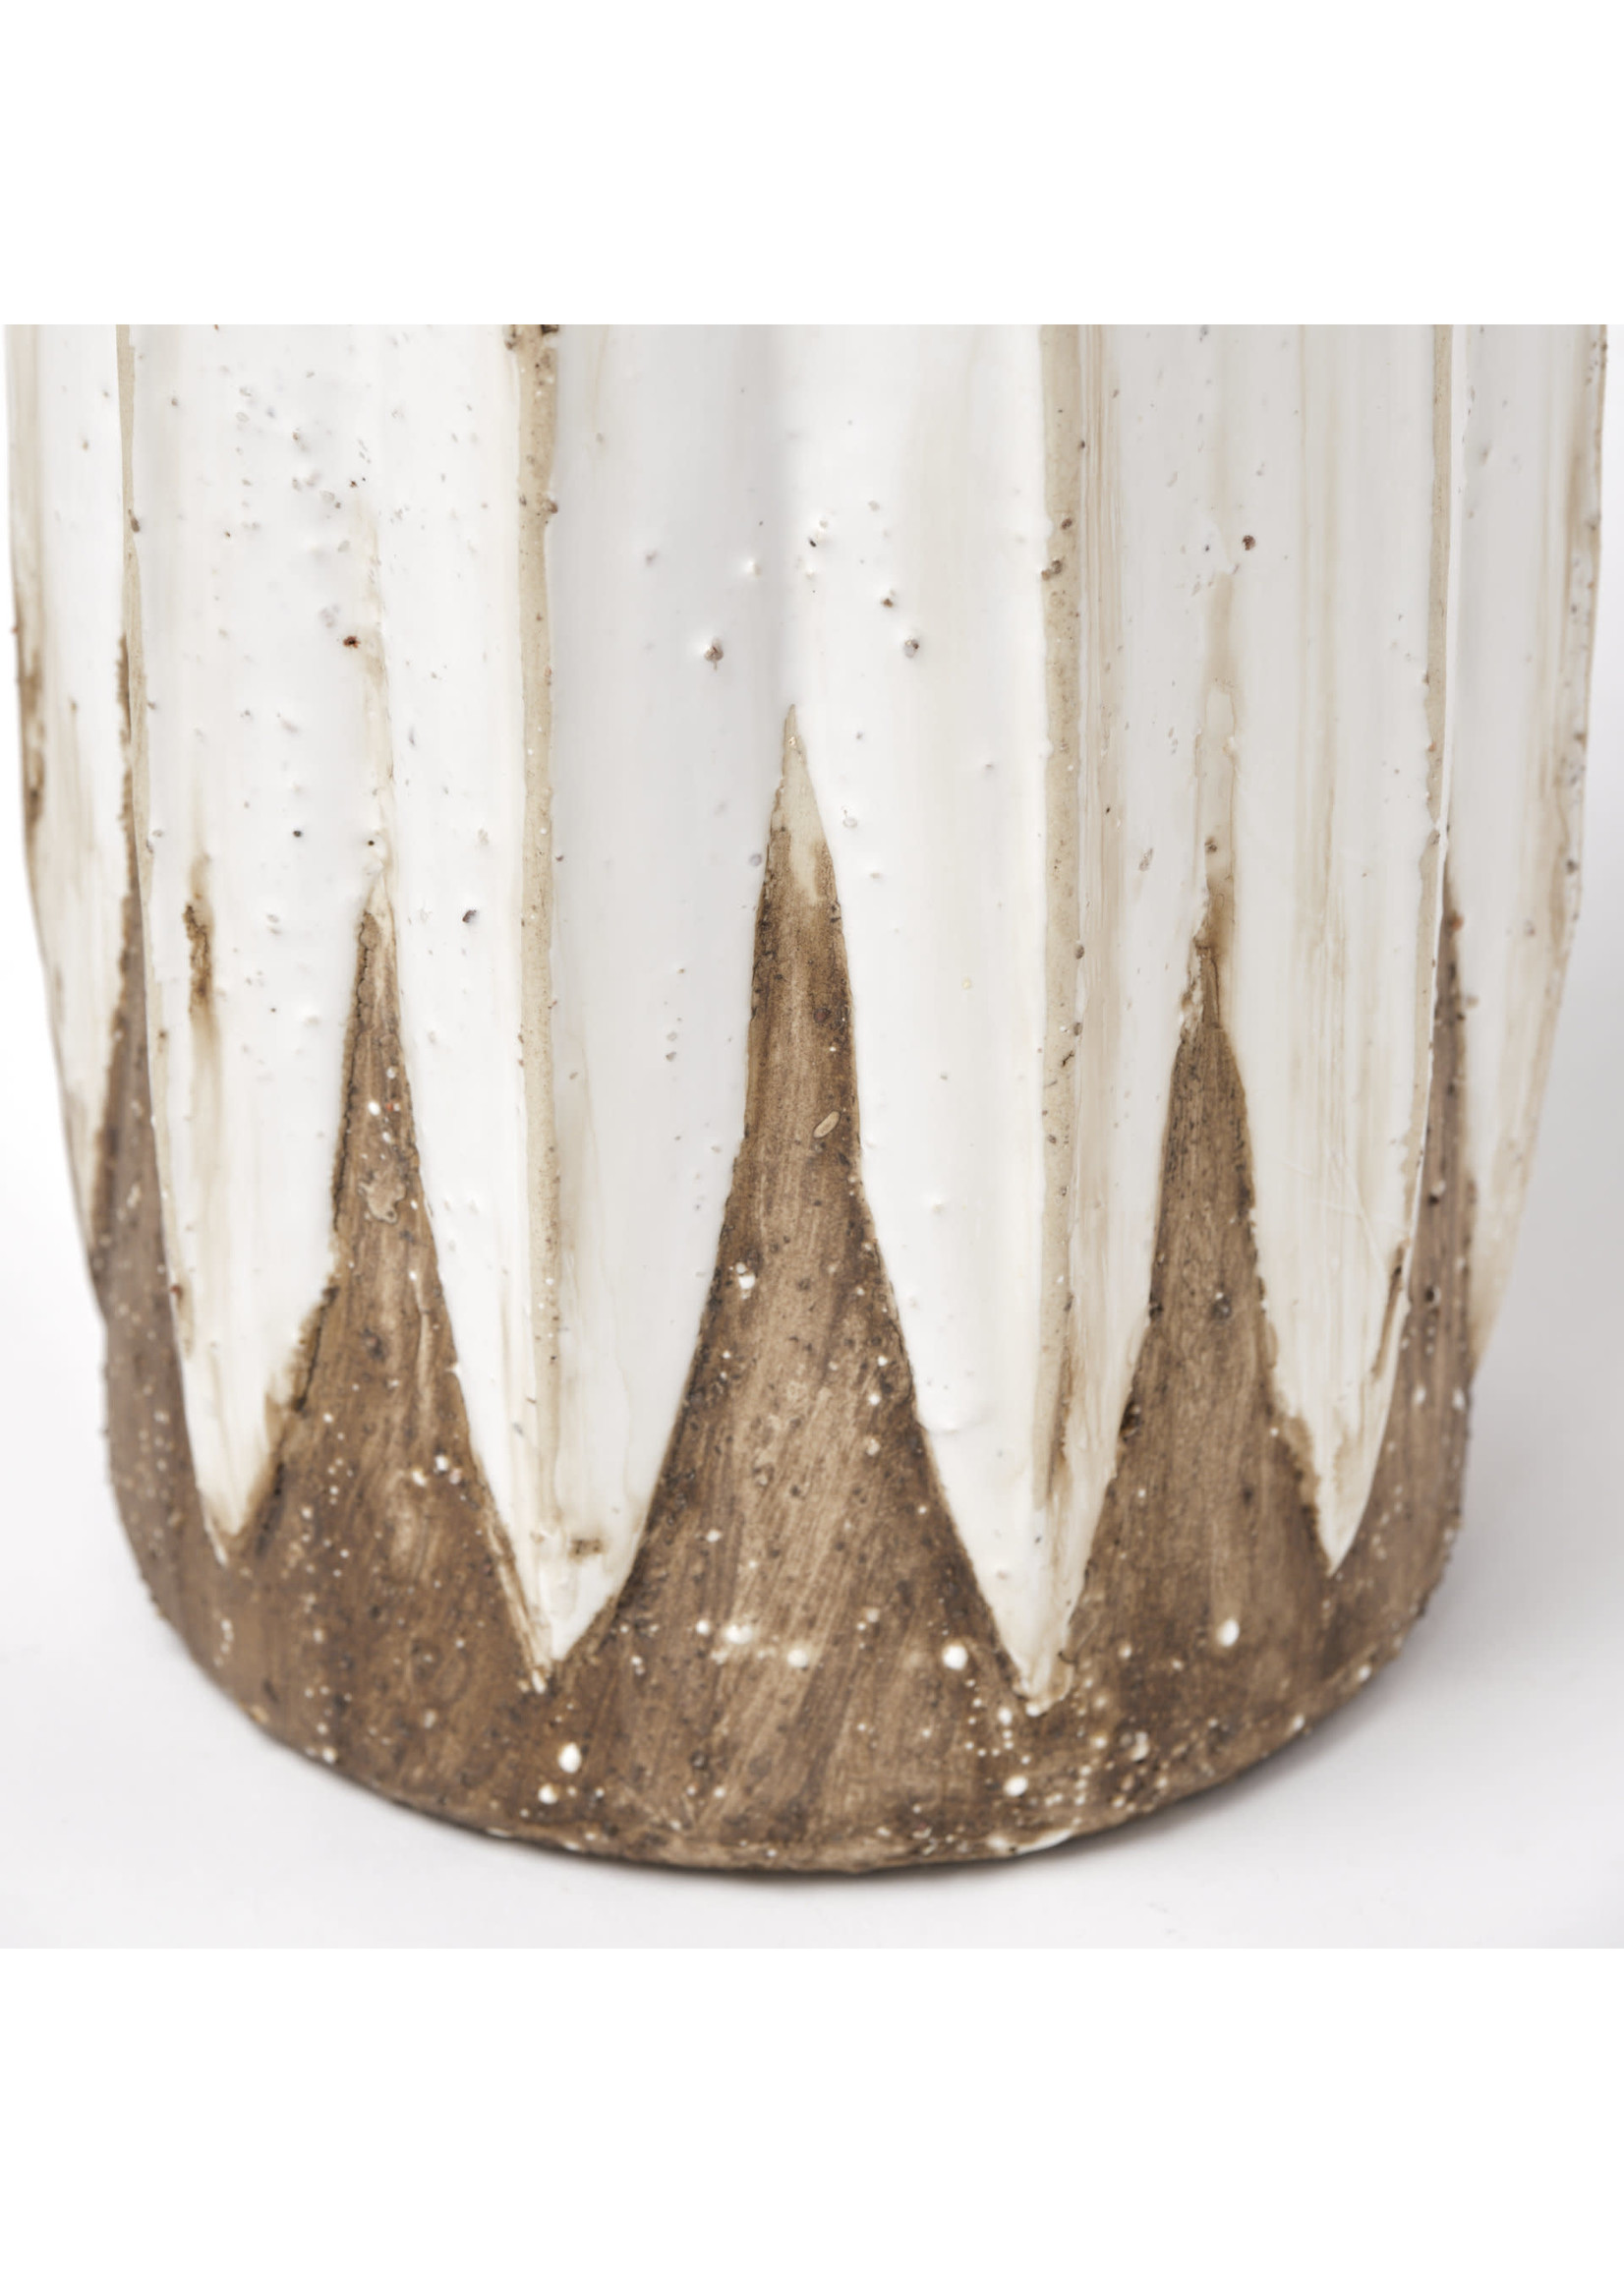 Rustic Brown and White Vase Large